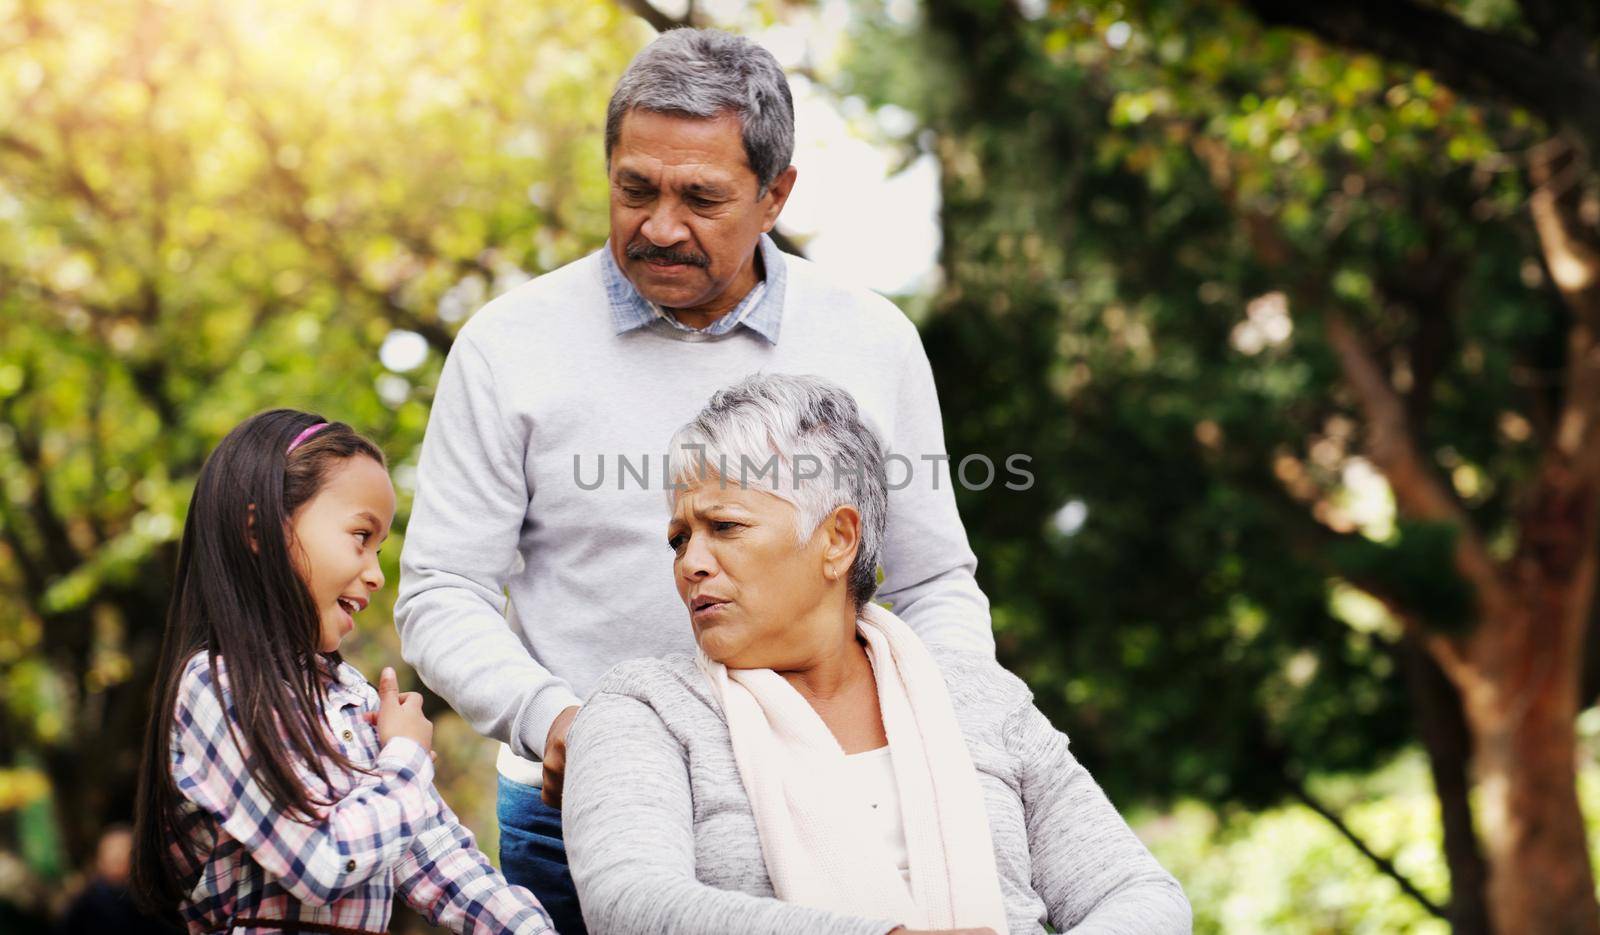 She always has interesting stories to tell us. an adorable little girl spending some time with her grandparents at the park